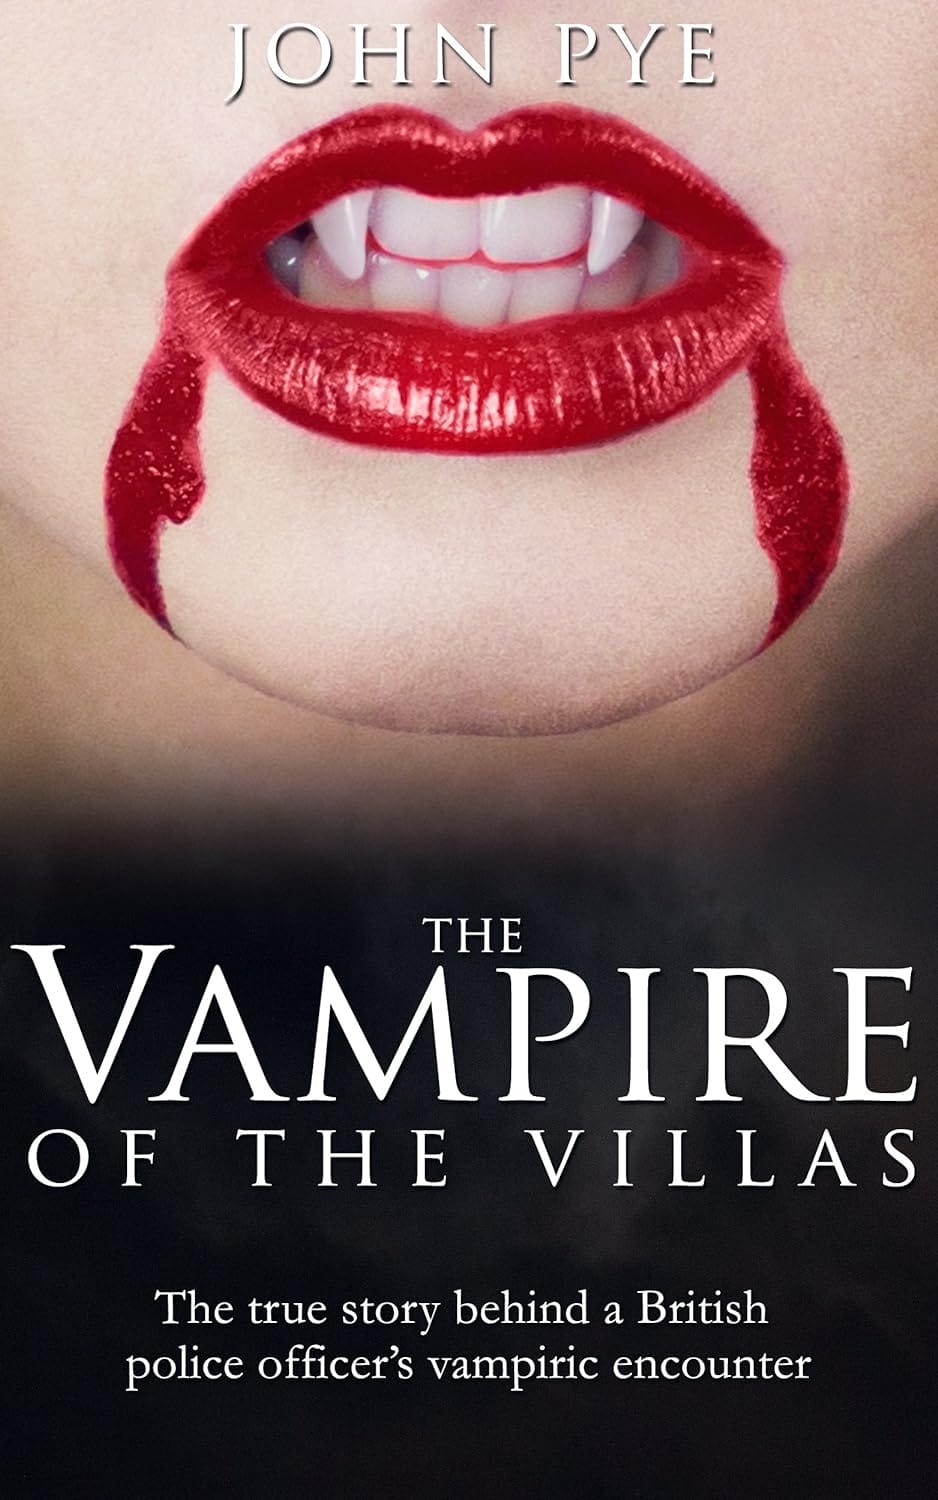 The Villas, The Vampire, and The Lamp Post, Stoke